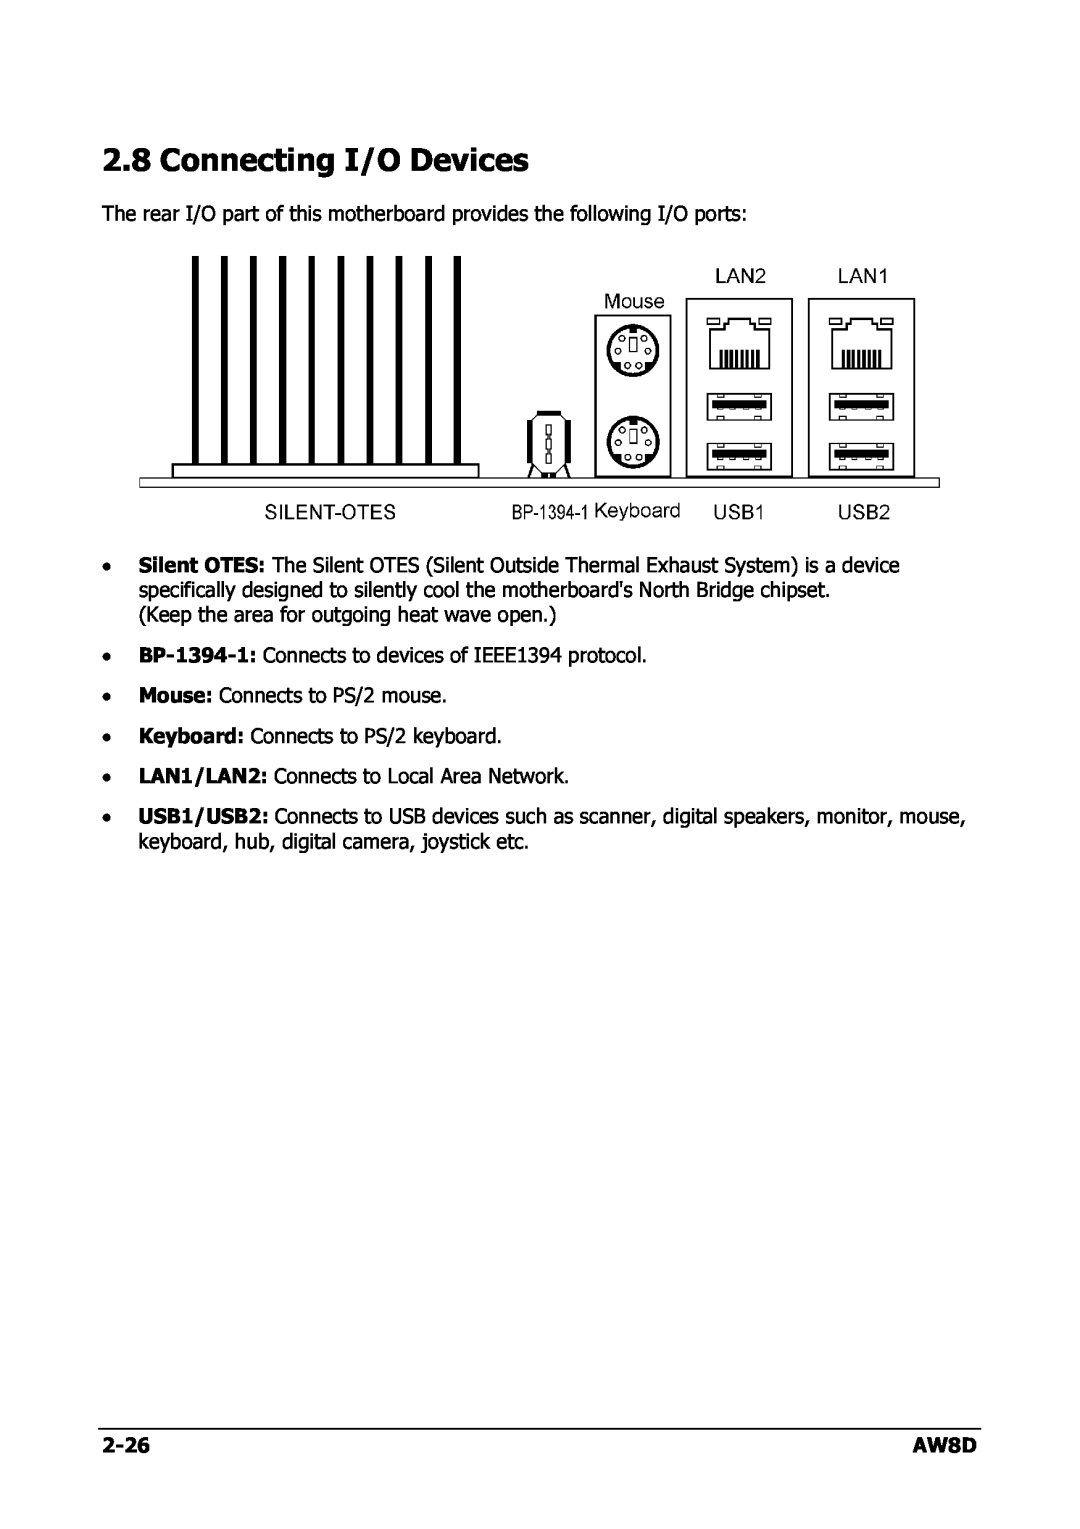 Intel AW8D user manual Connecting I/O Devices 